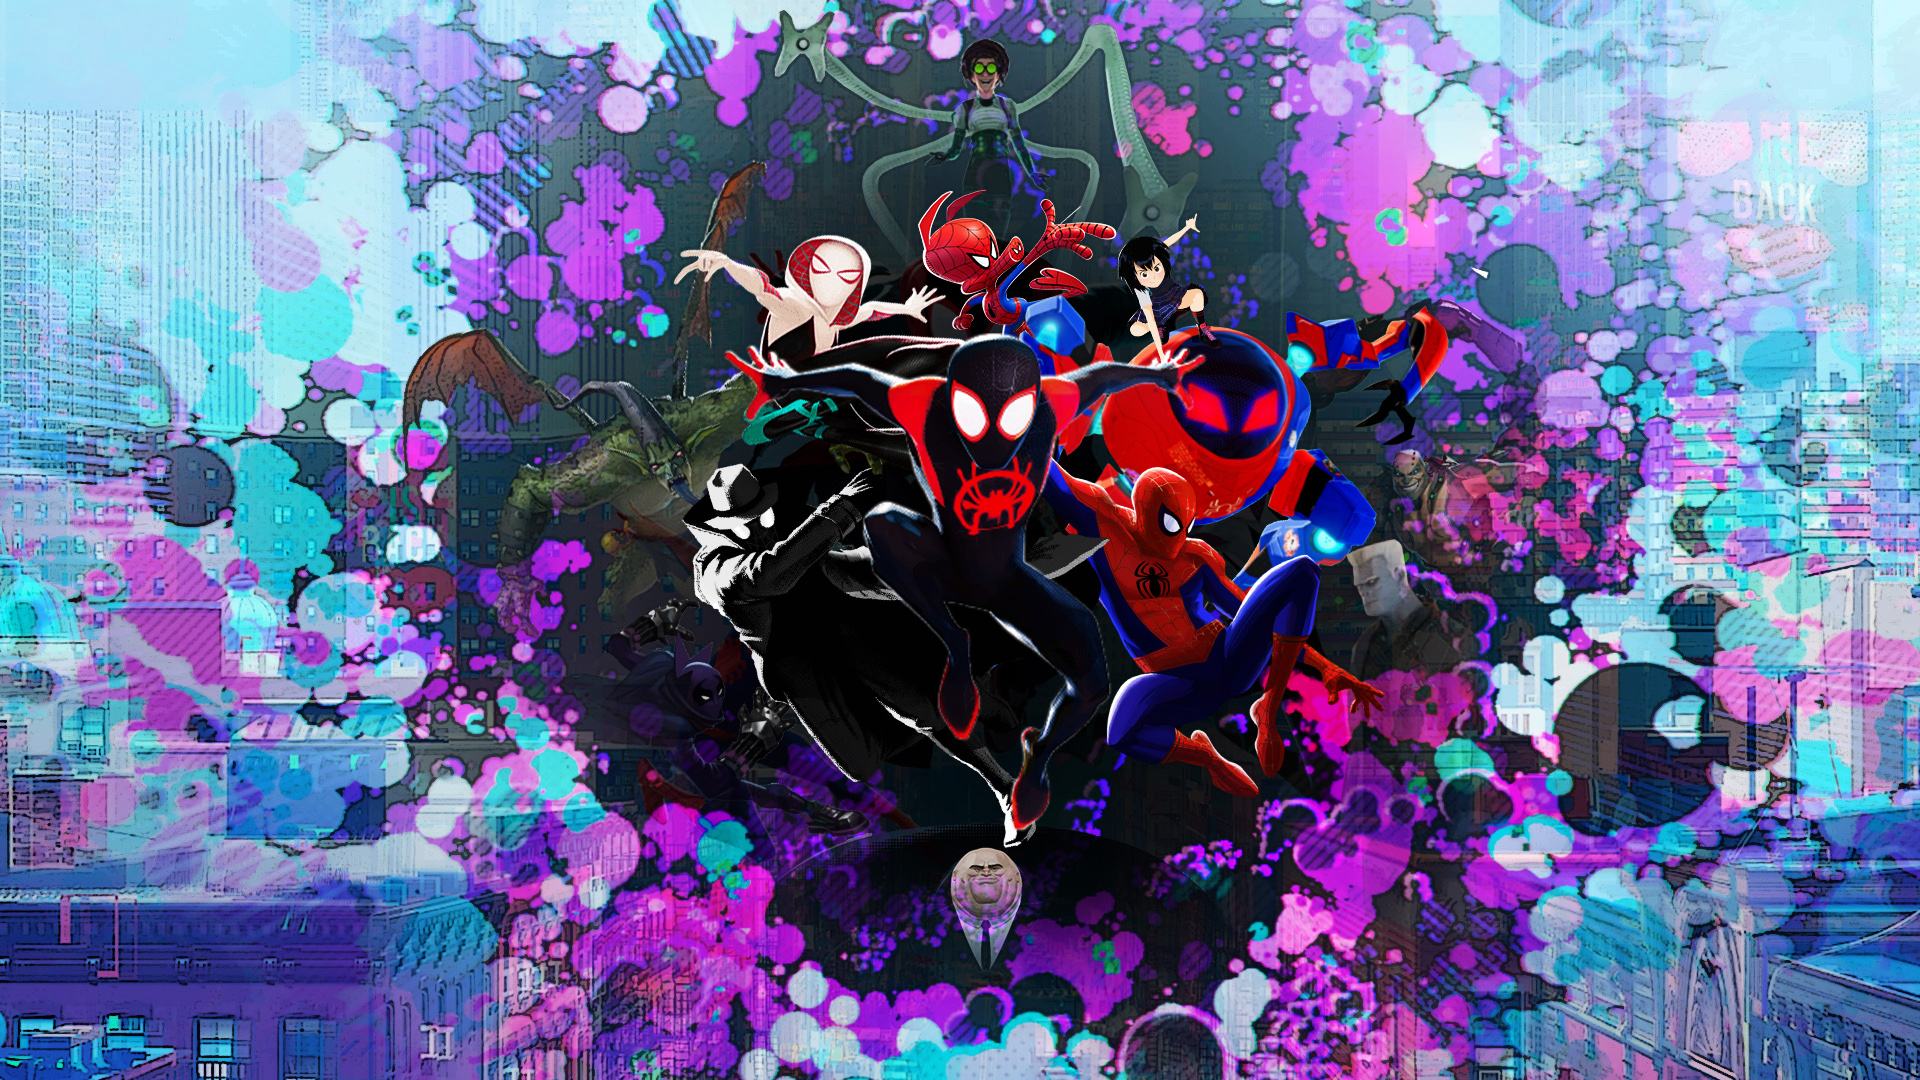 Spider-man Into the Spider-Verse Wallpaper by Thekingblader995 on